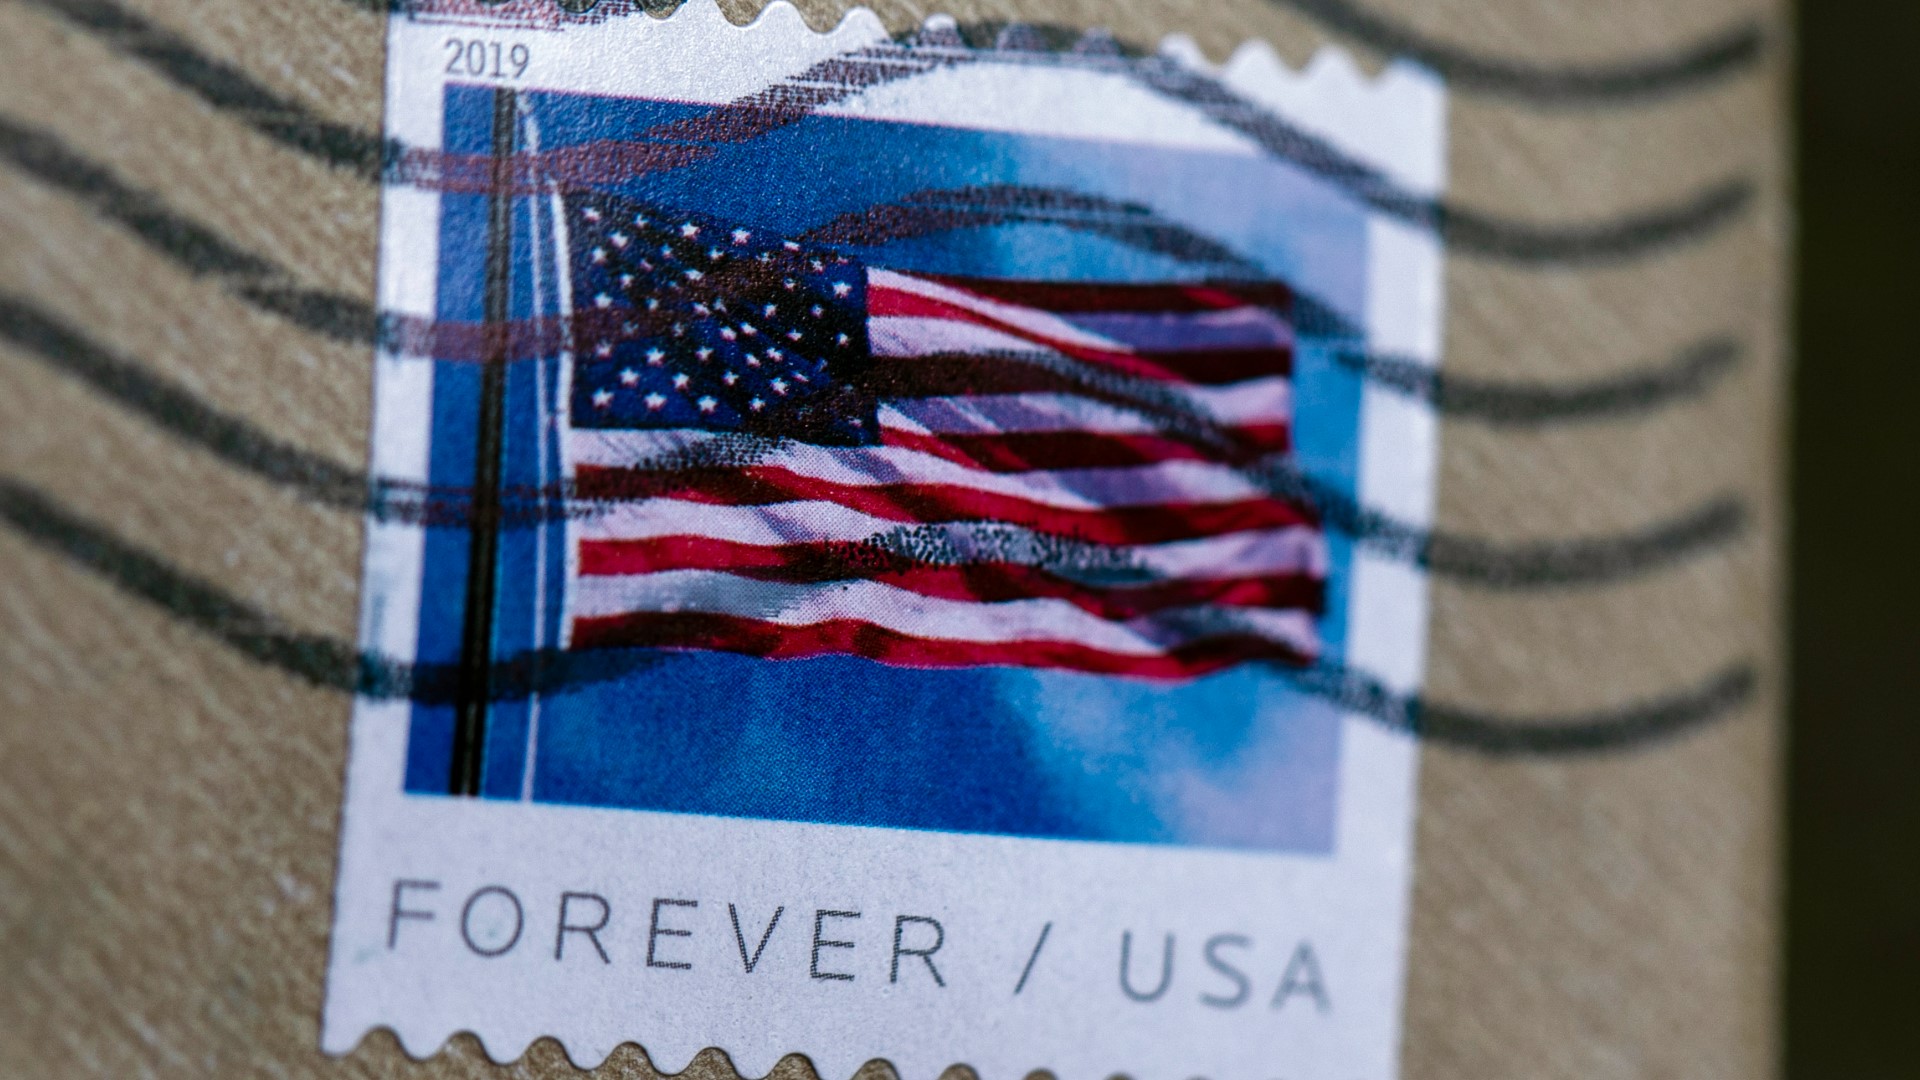 The U.S. Postmaster General previously warned postal customers to get used to “uncomfortable" rate hikes as the Postal Service seeks to become self-sufficient.